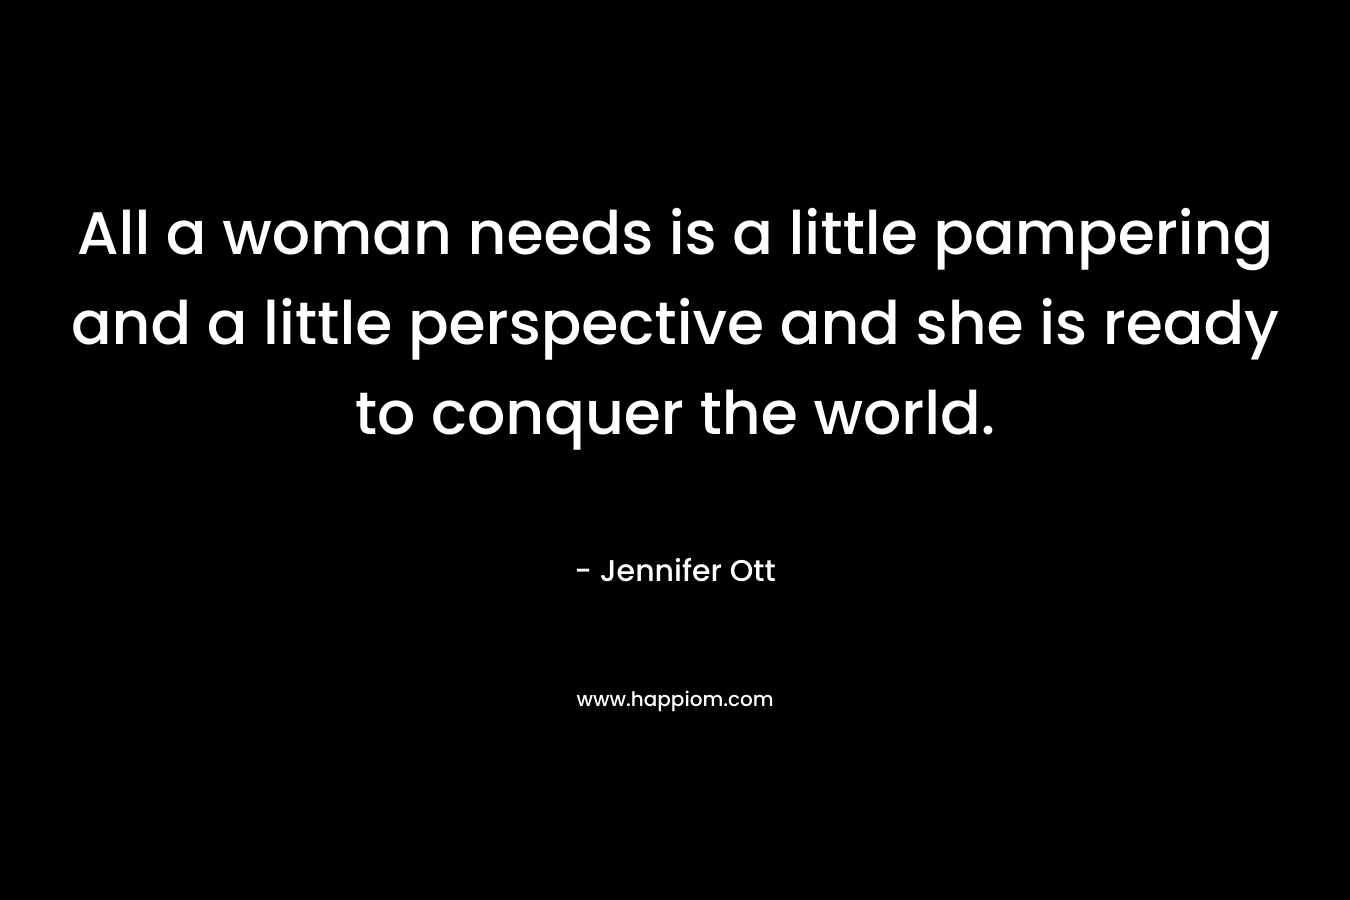 All a woman needs is a little pampering and a little perspective and she is ready to conquer the world. – Jennifer Ott